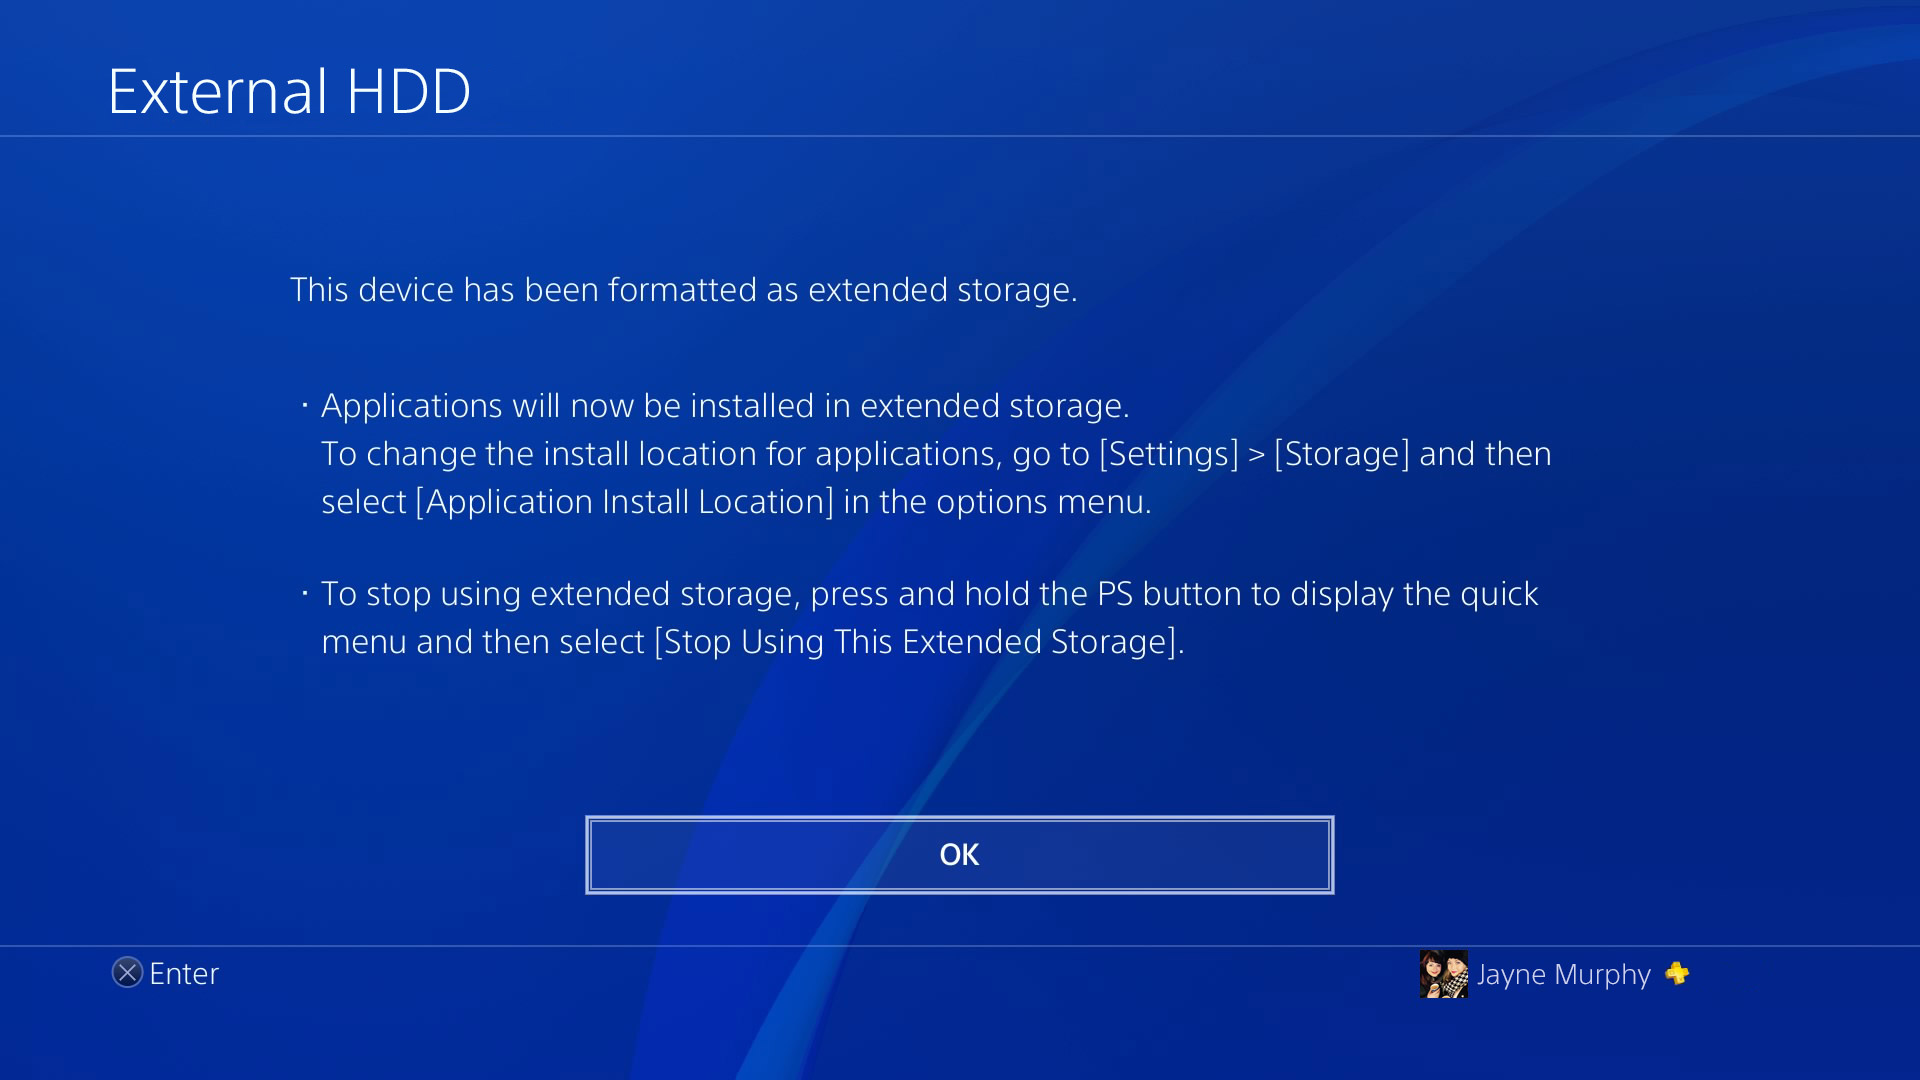 Update the system software: Make sure your PS4 is running on the latest system software version. Go to Settings > System Software Update and check for any available updates. Install them if there are any.
Clear cache and cookies: Clearing the cache and cookies on your PS4 can sometimes fix the NP-36006-5 error. Go to Settings > Storage > System Storage and select "Clear Cache" and "Delete Cookies." Restart your console after completing this process.